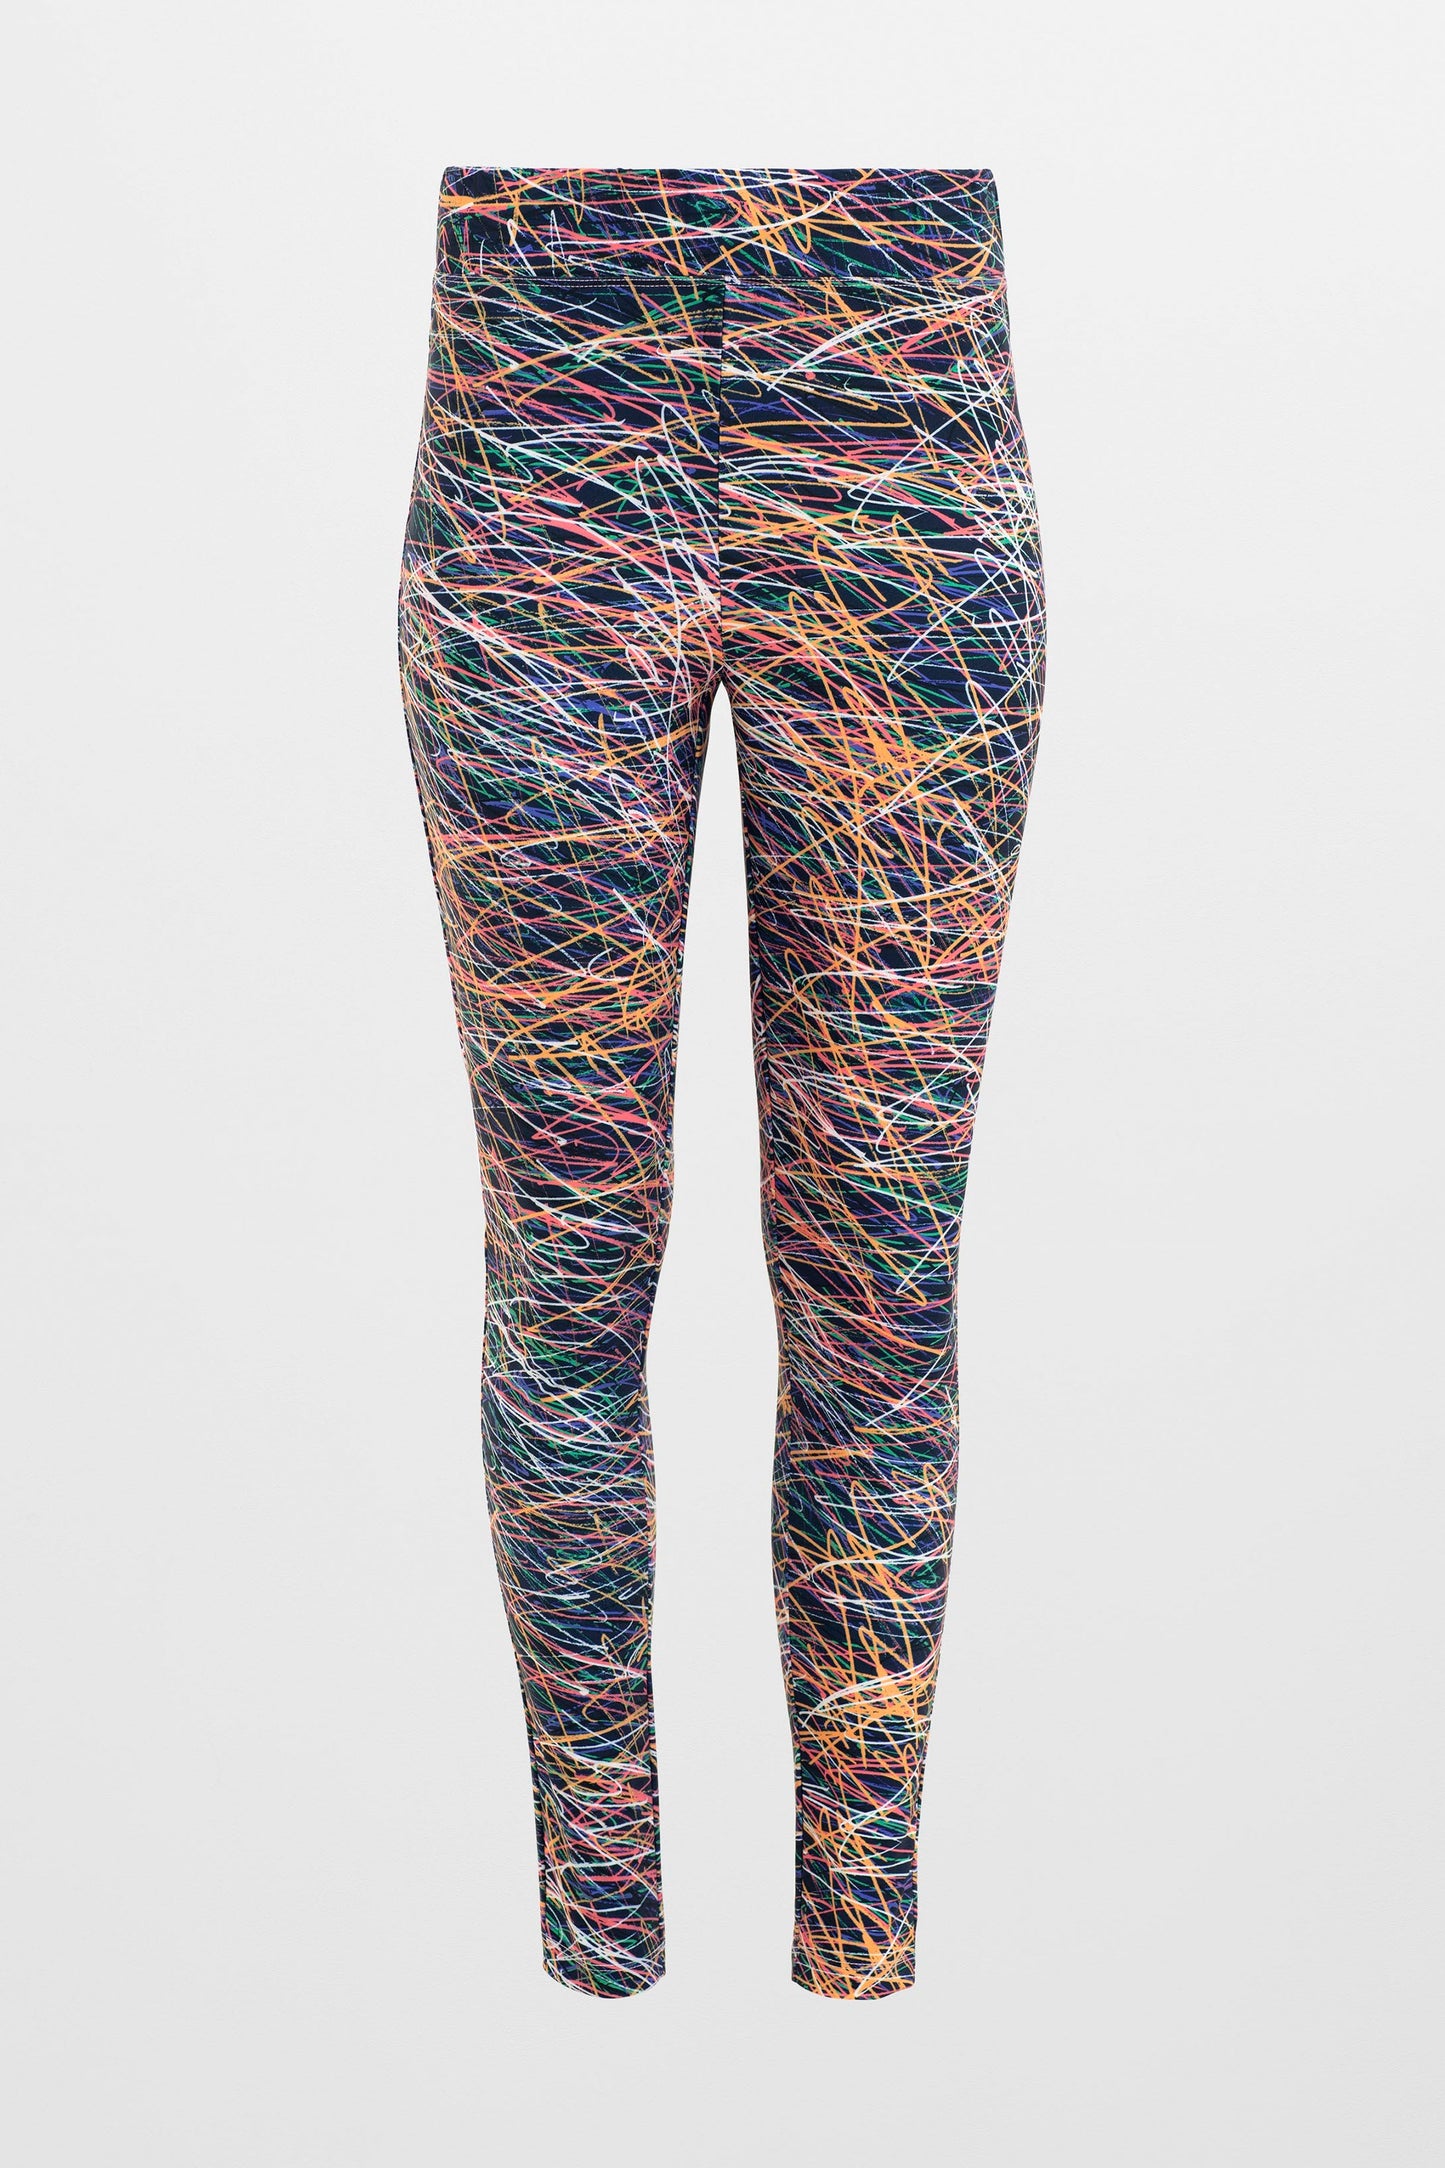 Ohut Recycled Fabric Stretch Print Legging Pant front | MAILA PRINT